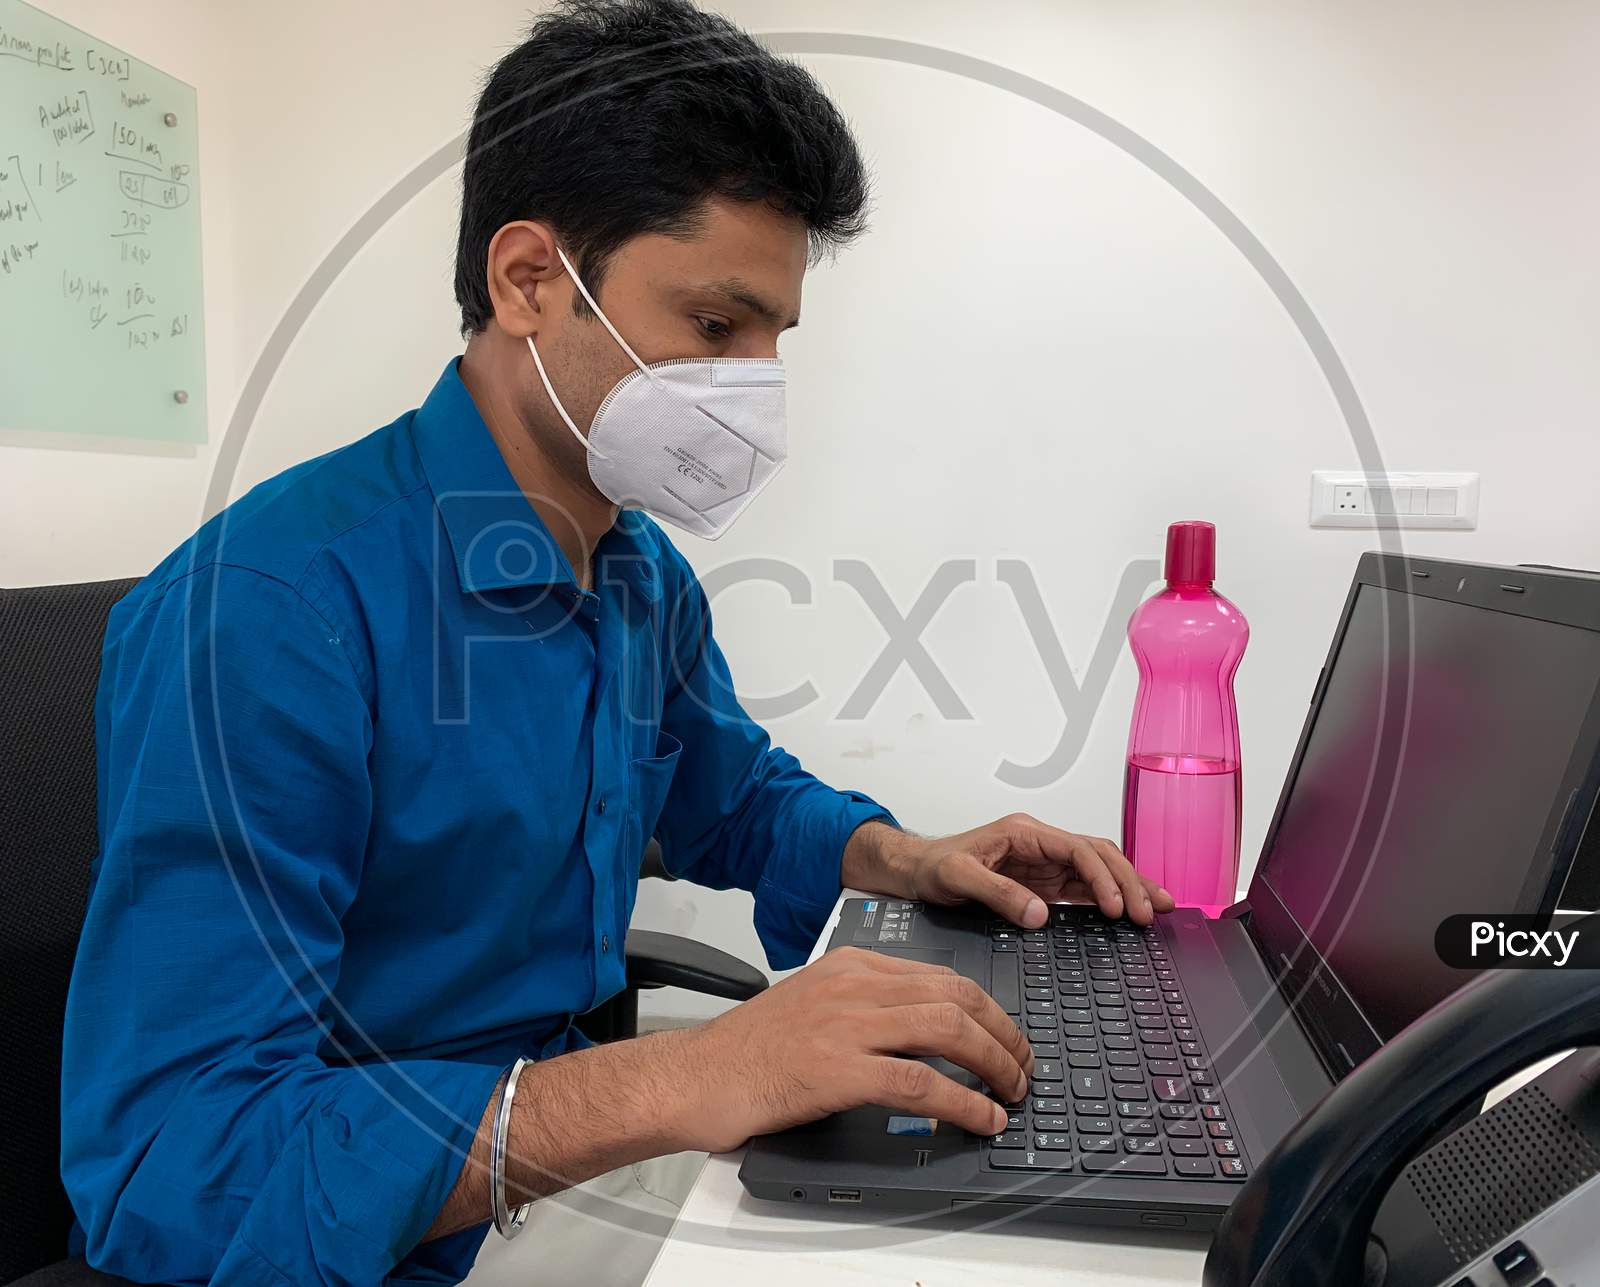 Man With Mask On Face Working On Laptop At Office.